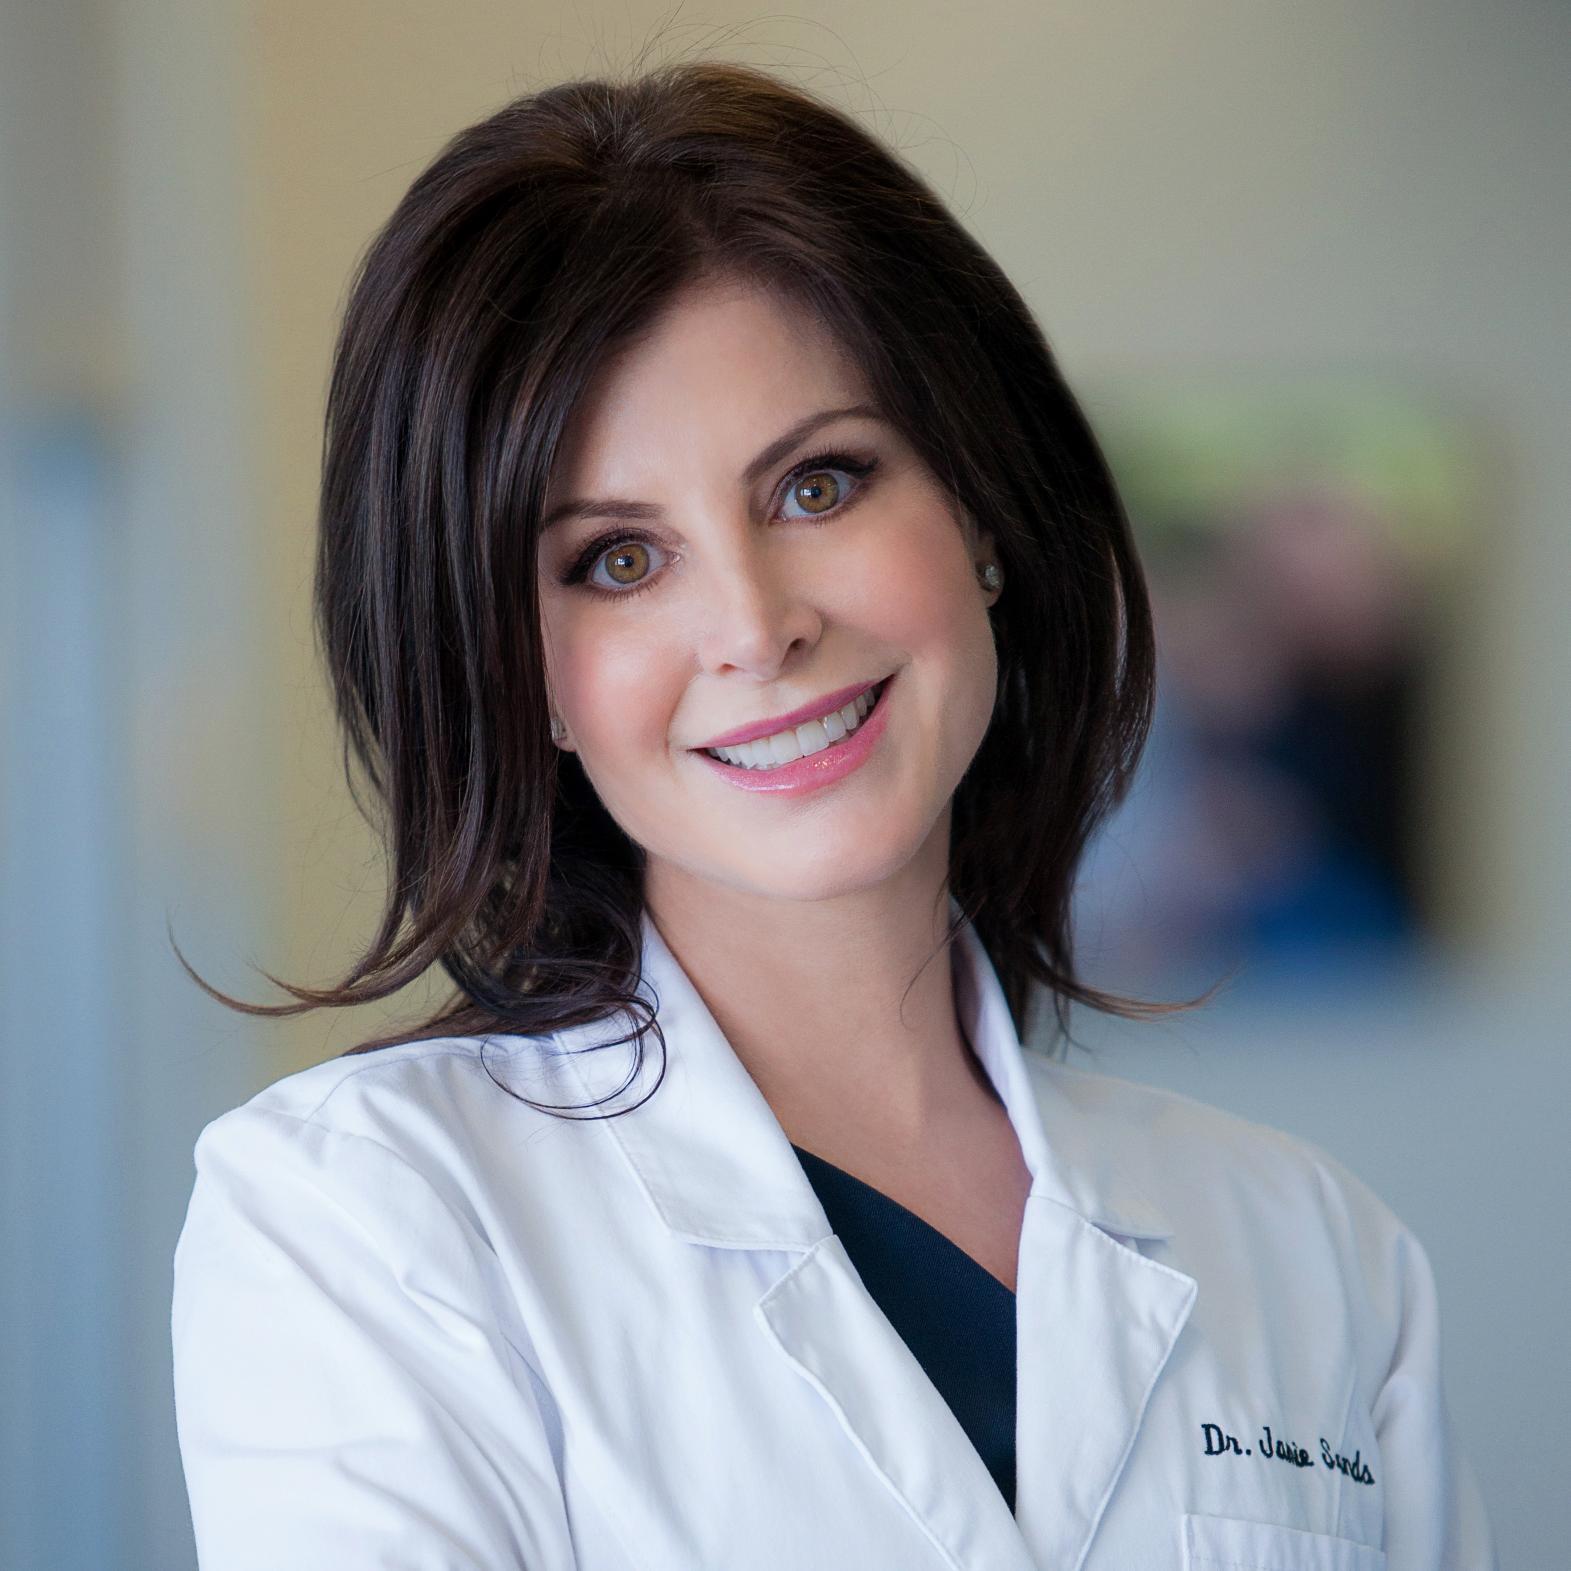 One of LA's most sought after & highly lauded cosmetic dentists. Her technical acuity, artistic eye & holistic approach create exceptional smiles!